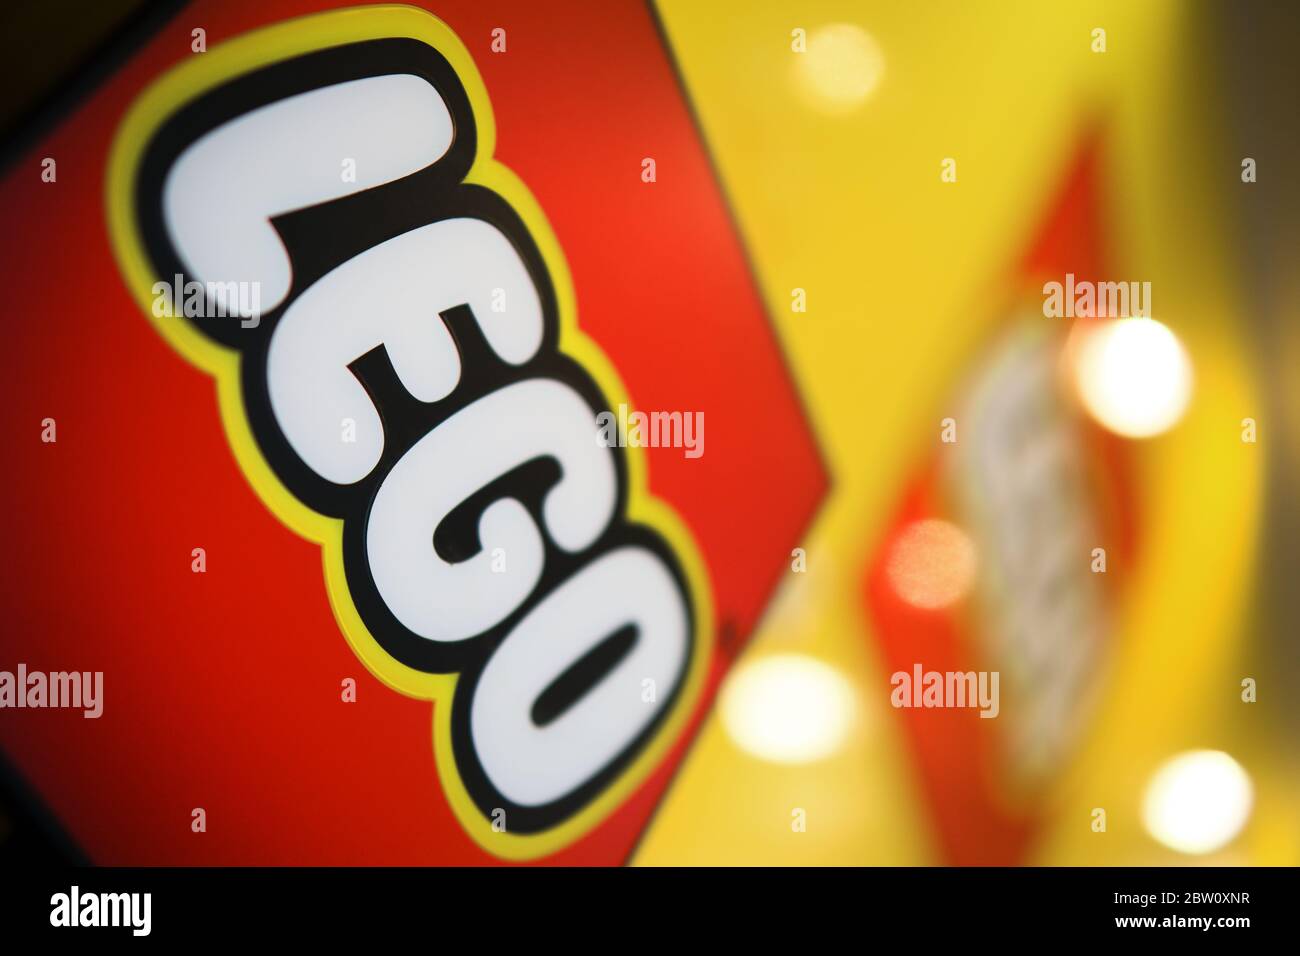 May 2020, LEGO brand logo in a retail store display Stock Photo